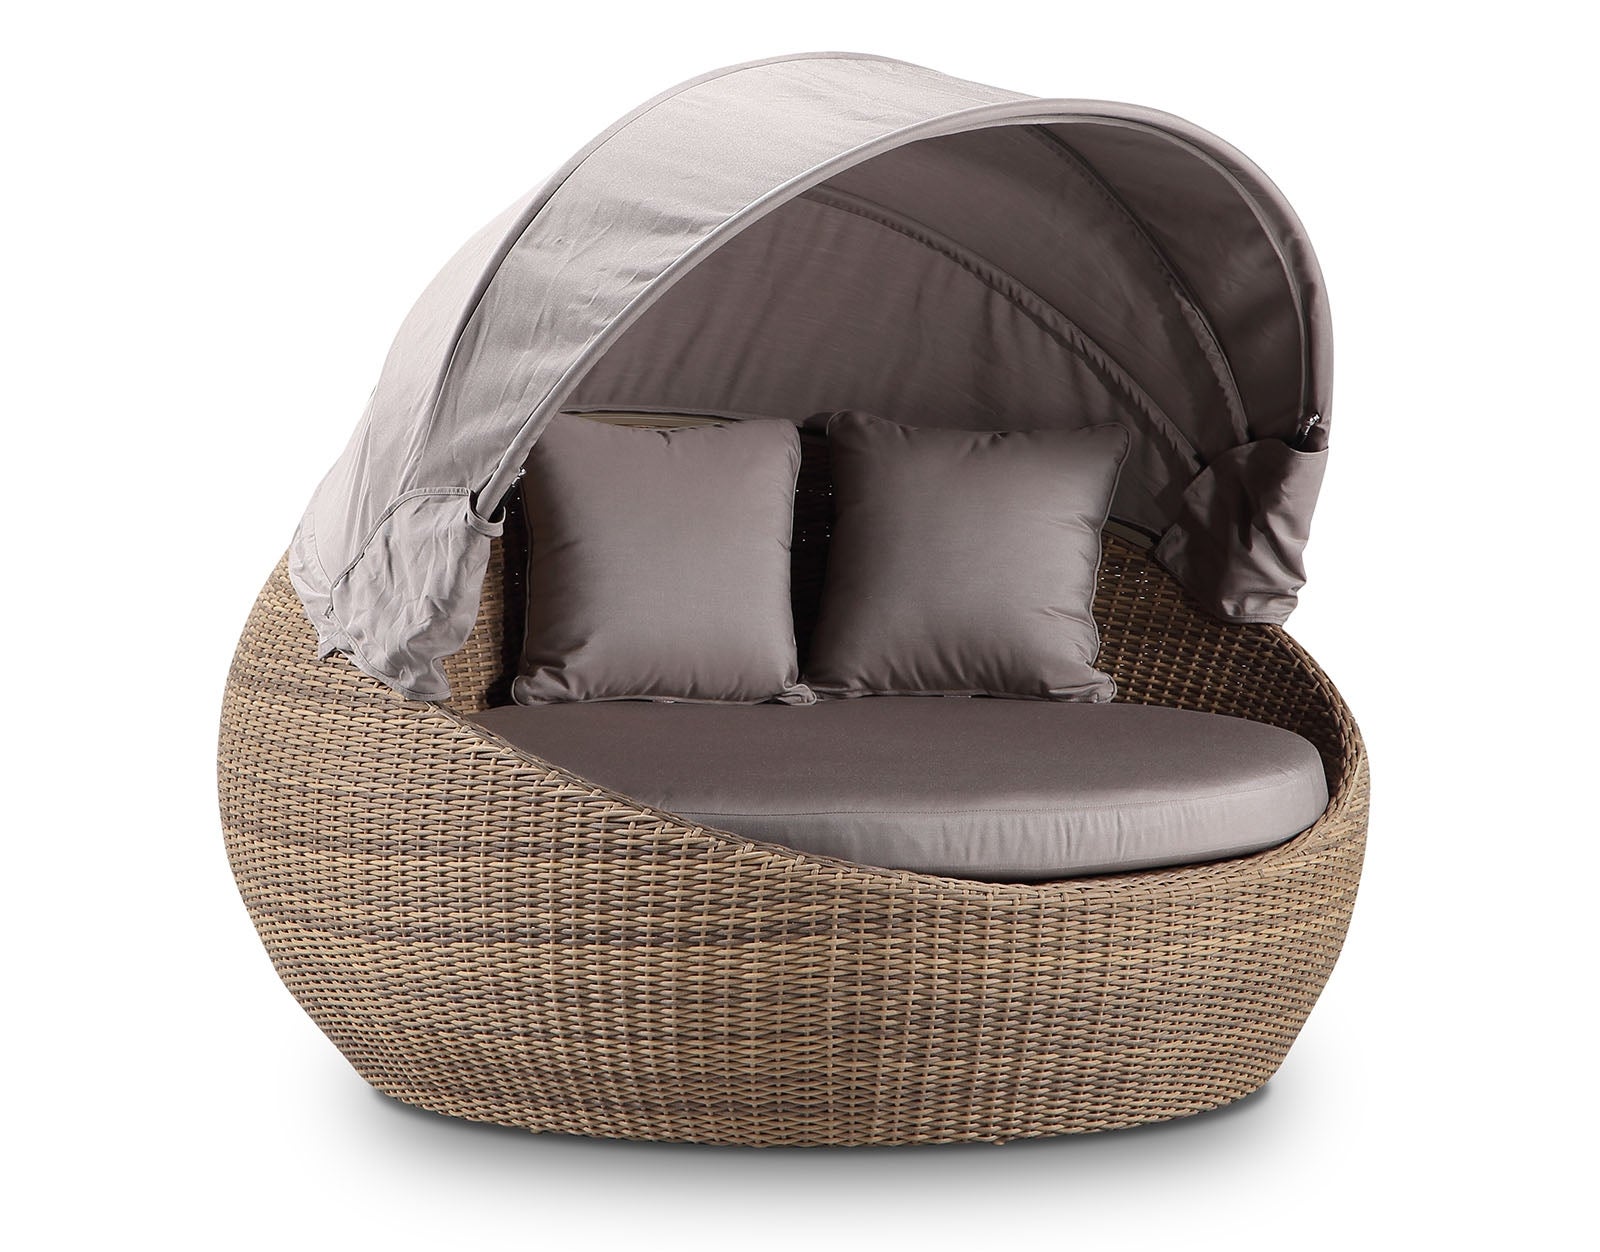 Newport Outdoor Wicker Round Daybed With Canopy In Sunbrella - Kimberly